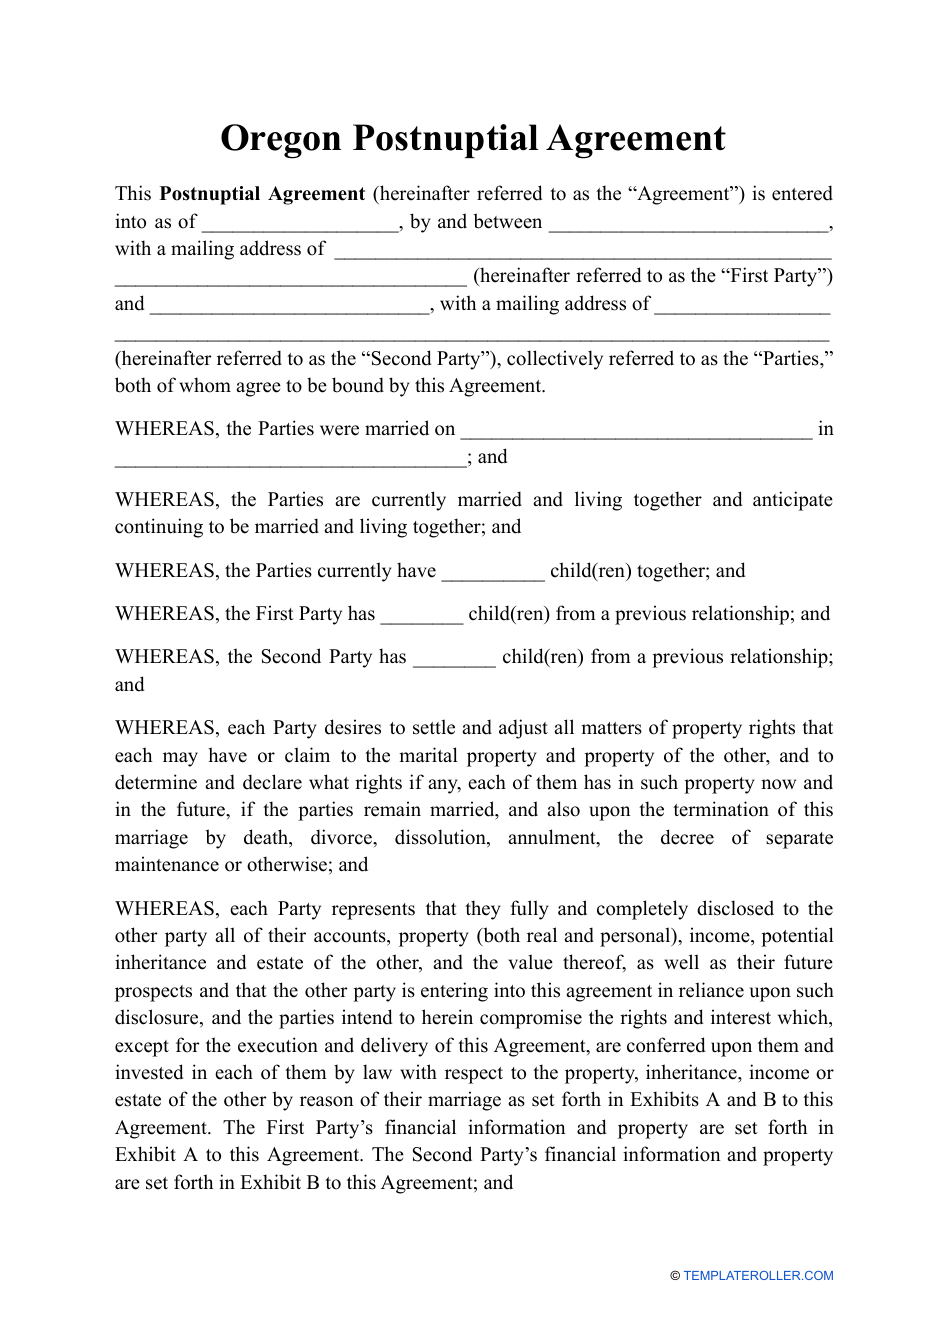 Postnuptial Agreement Template - Oregon, Page 1